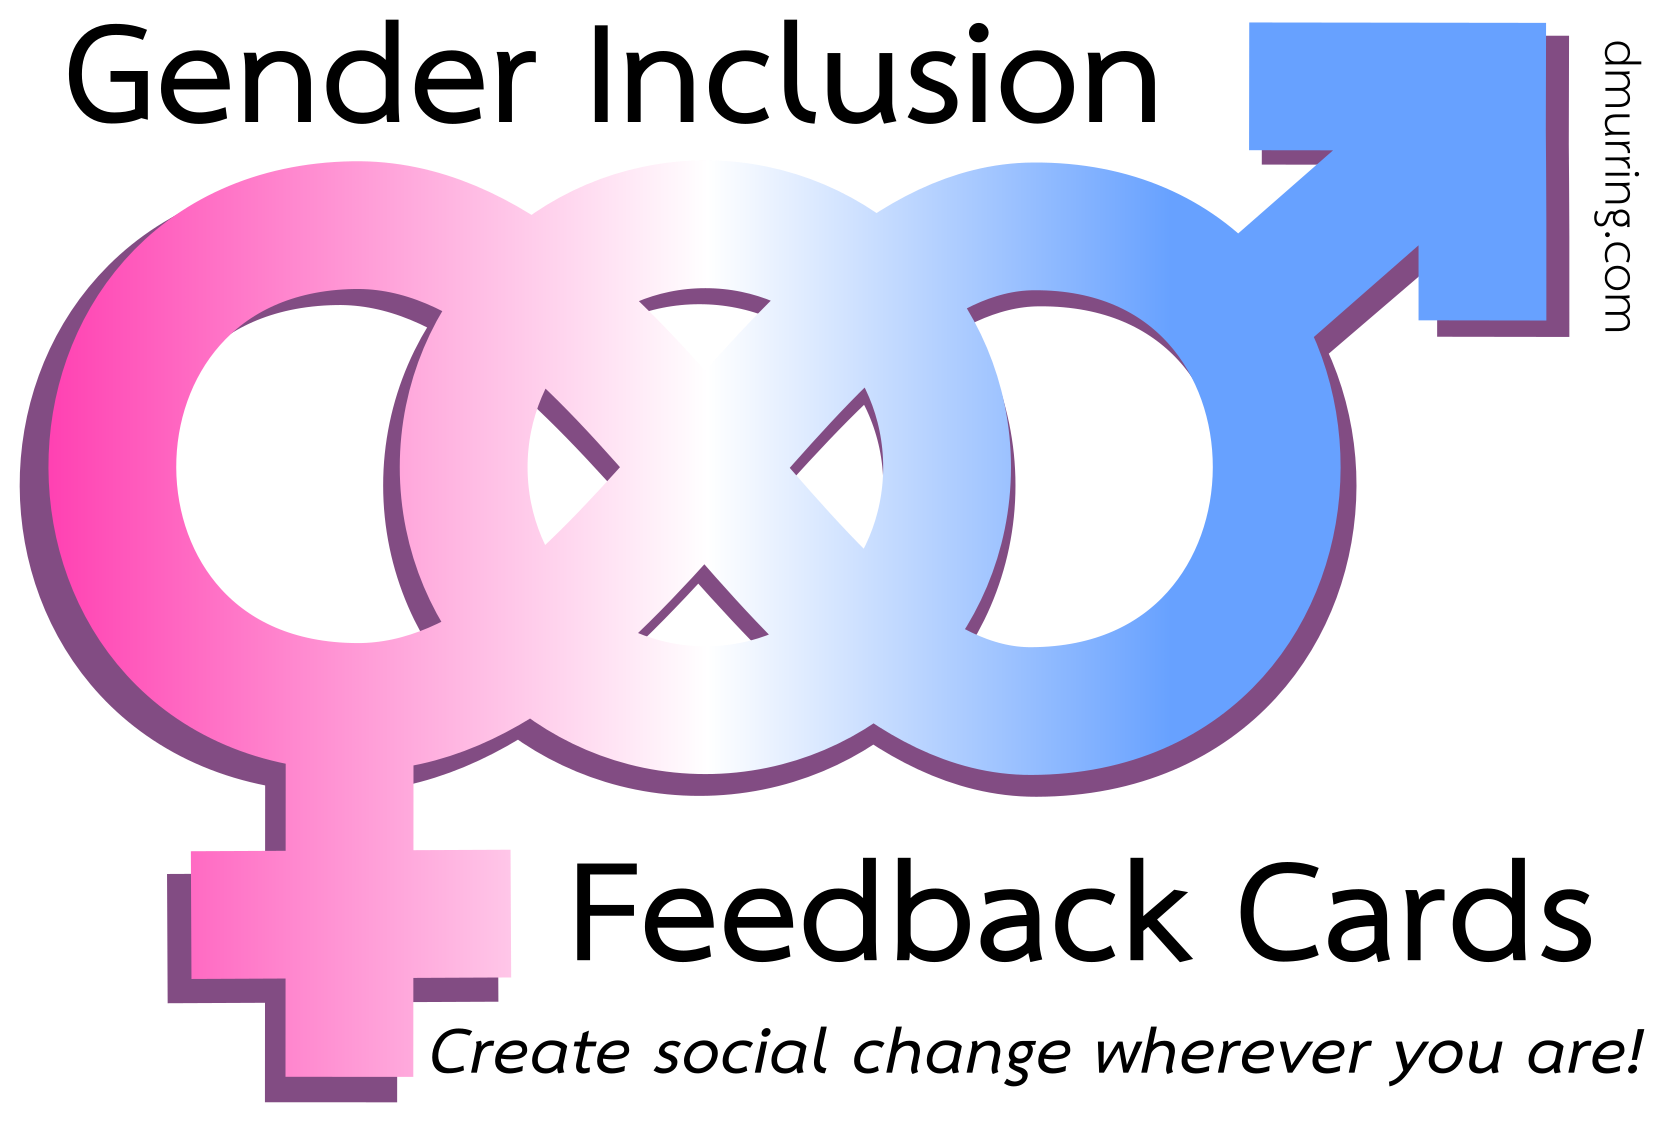 Gender Inclusion Feedback Cards logo: a symbol combining the standard male and female symbols to include nonbinary and null gender identities